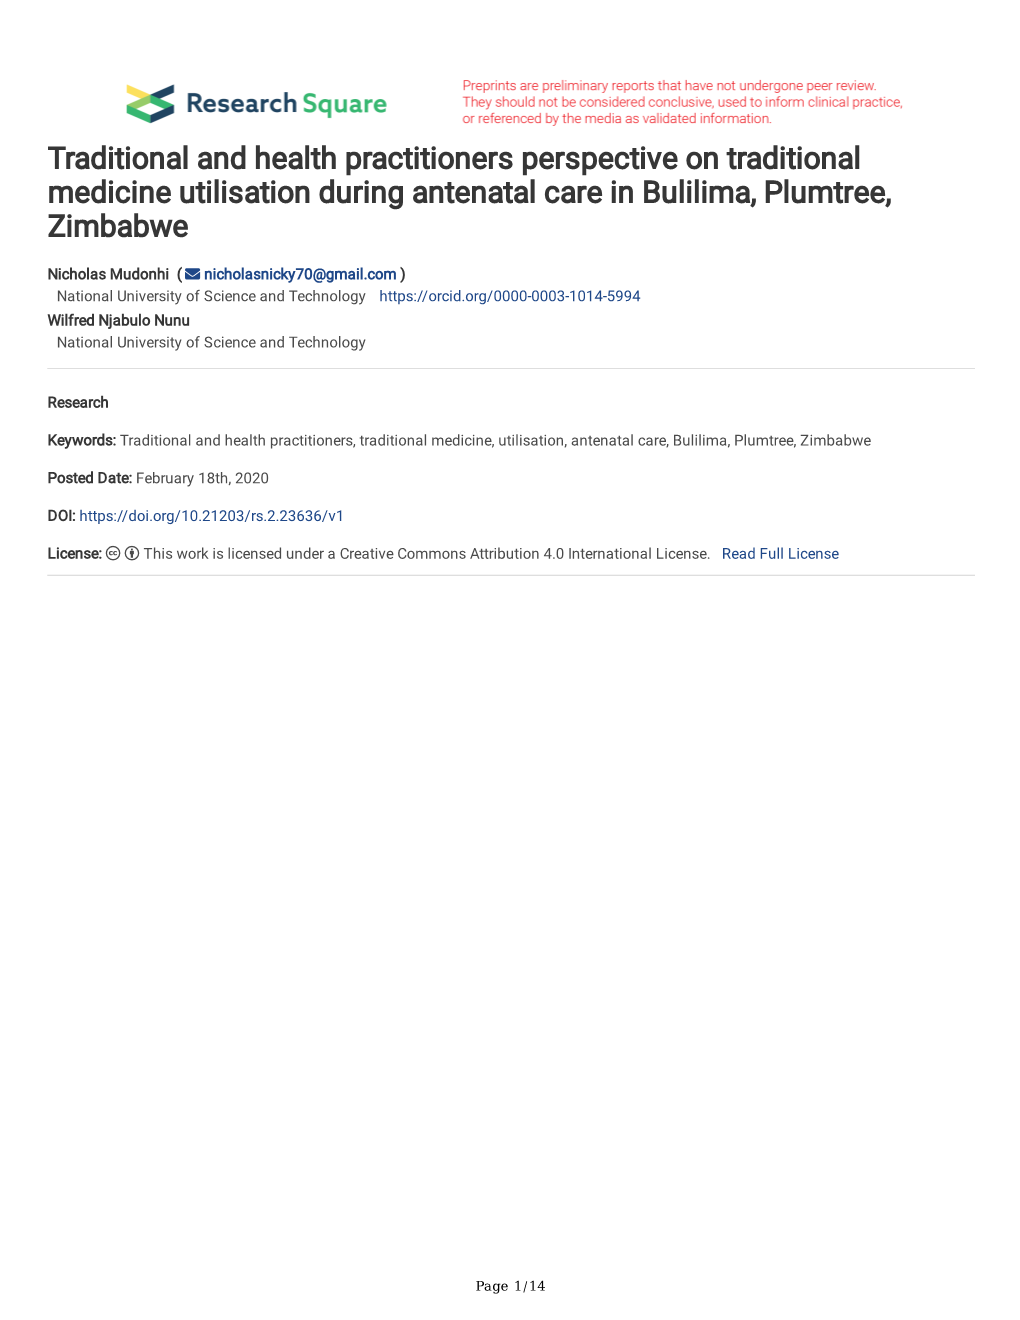 Traditional and Health Practitioners Perspective on Traditional Medicine Utilisation During Antenatal Care in Bulilima, Plumtree, Zimbabwe